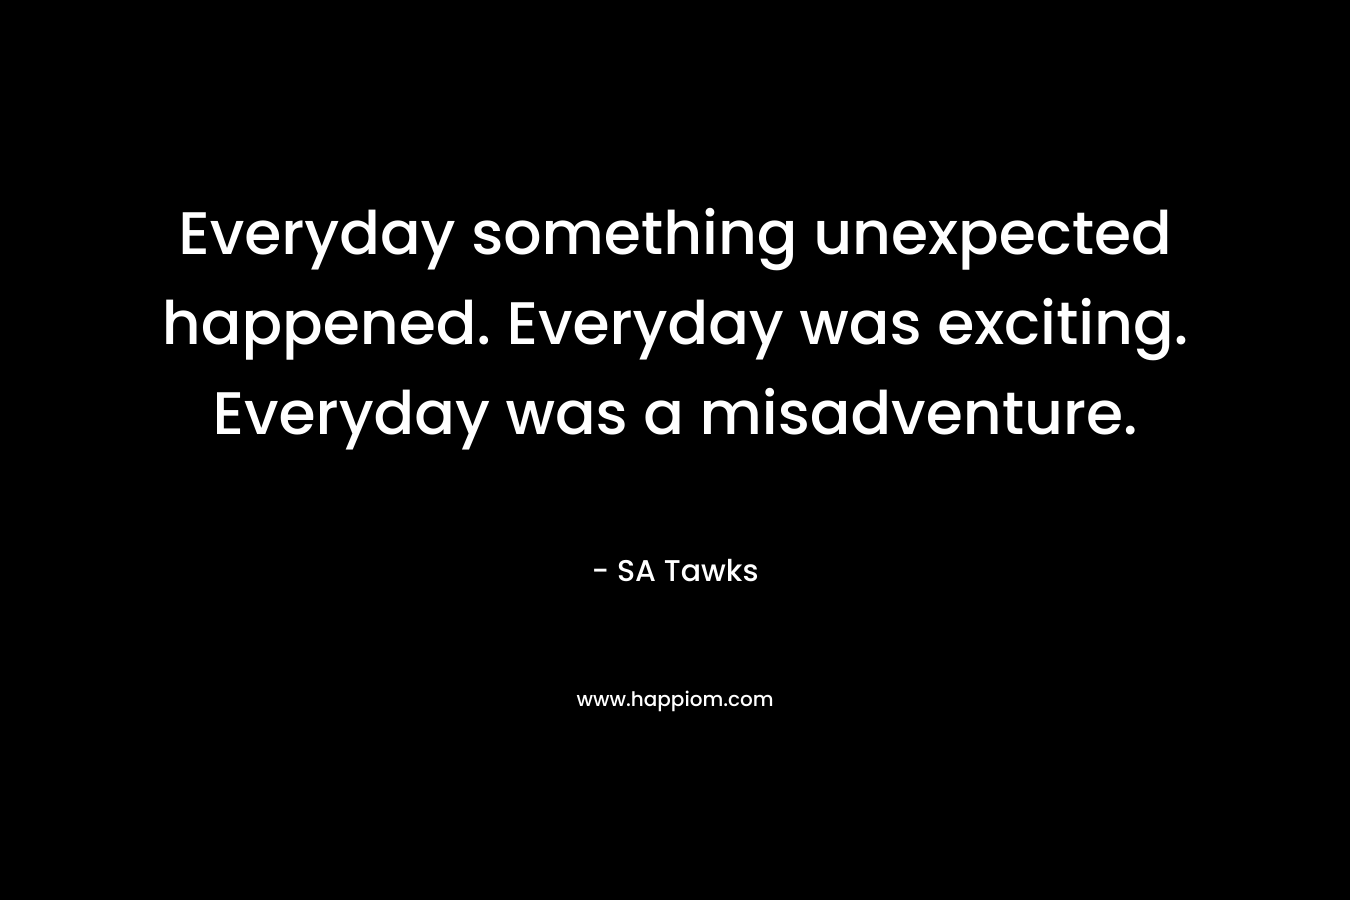 Everyday something unexpected happened. Everyday was exciting. Everyday was a misadventure.